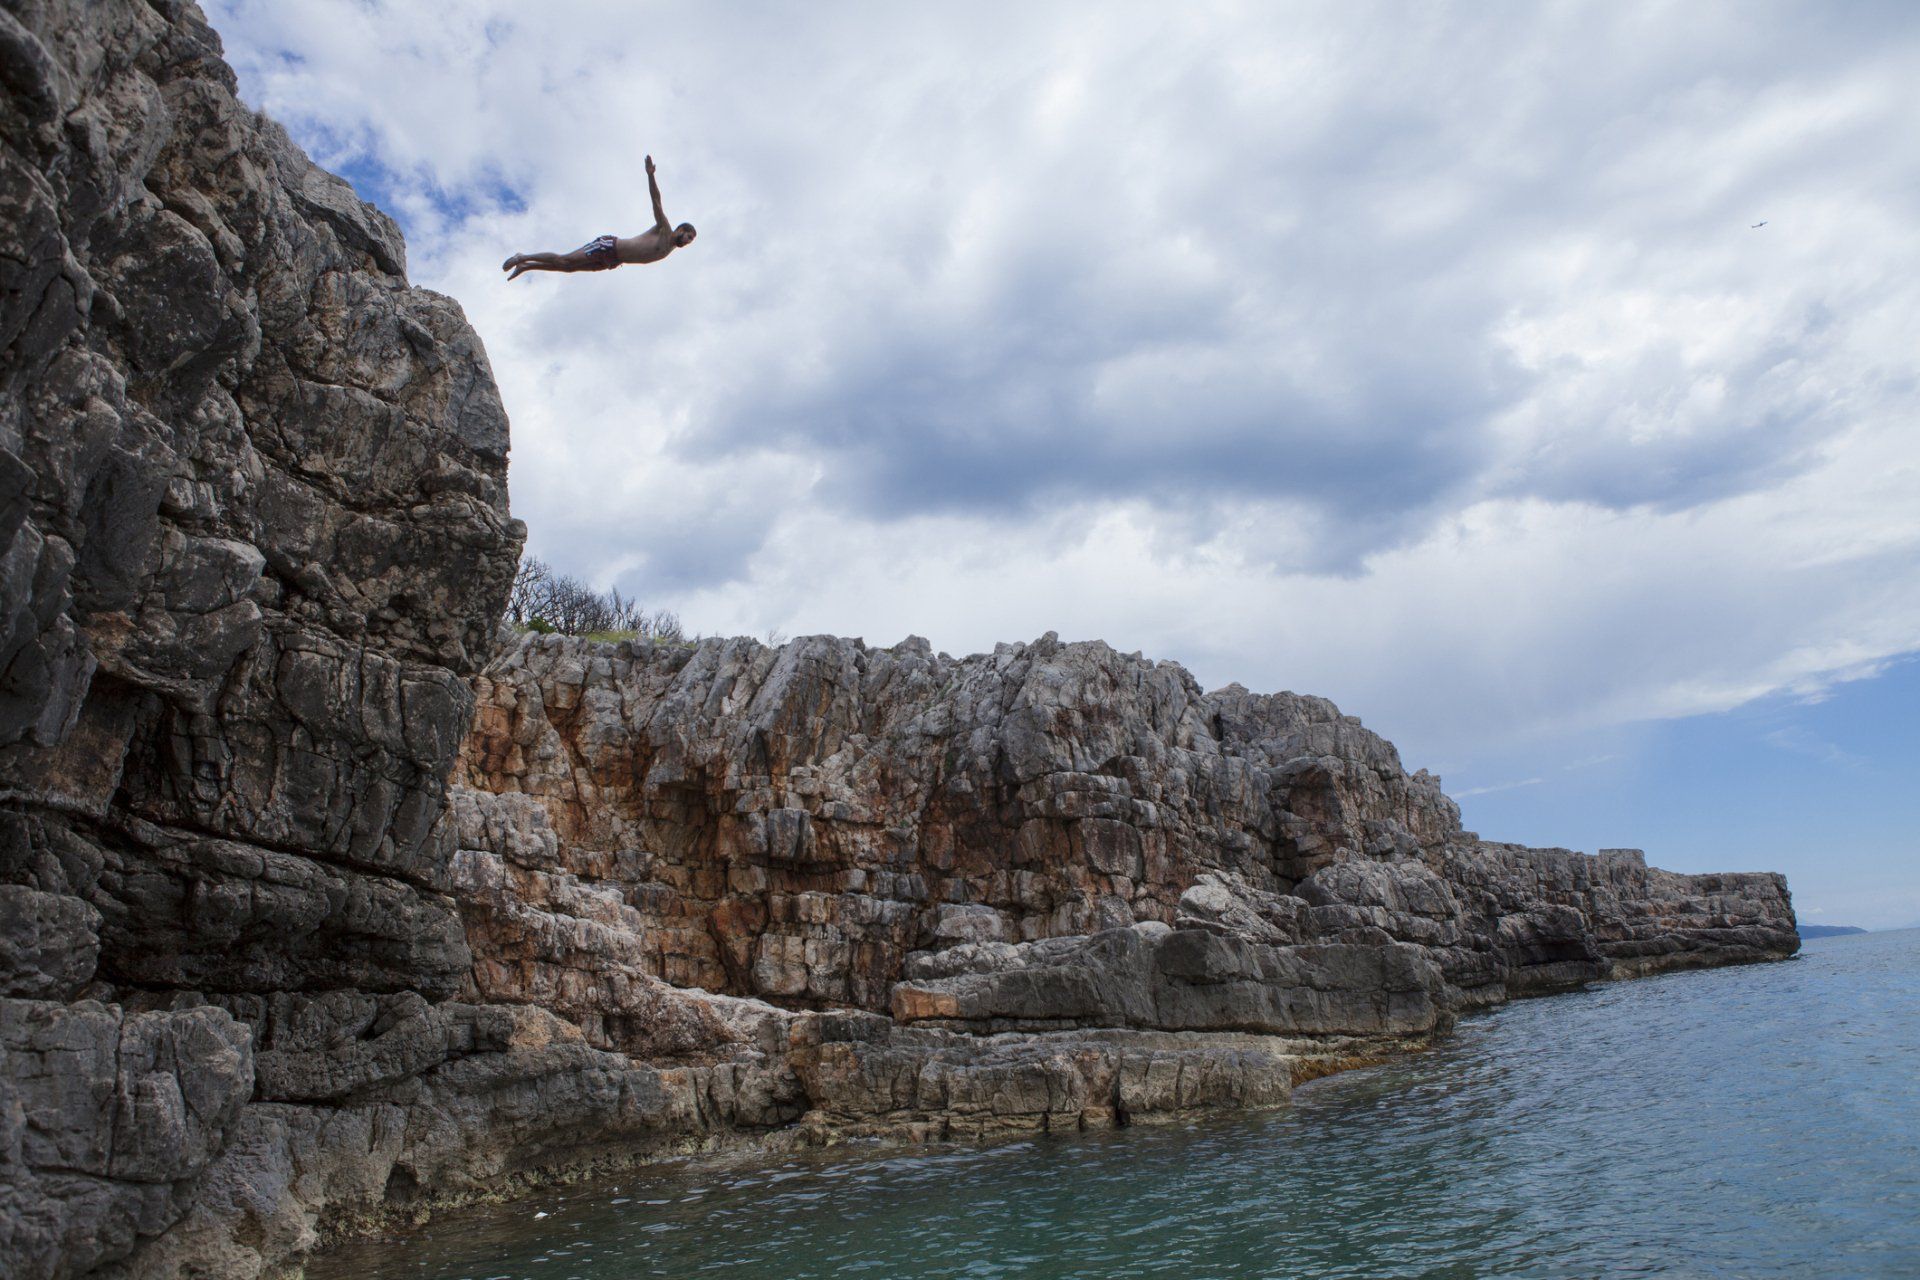 Adrenaline junkie jumping off a cliff